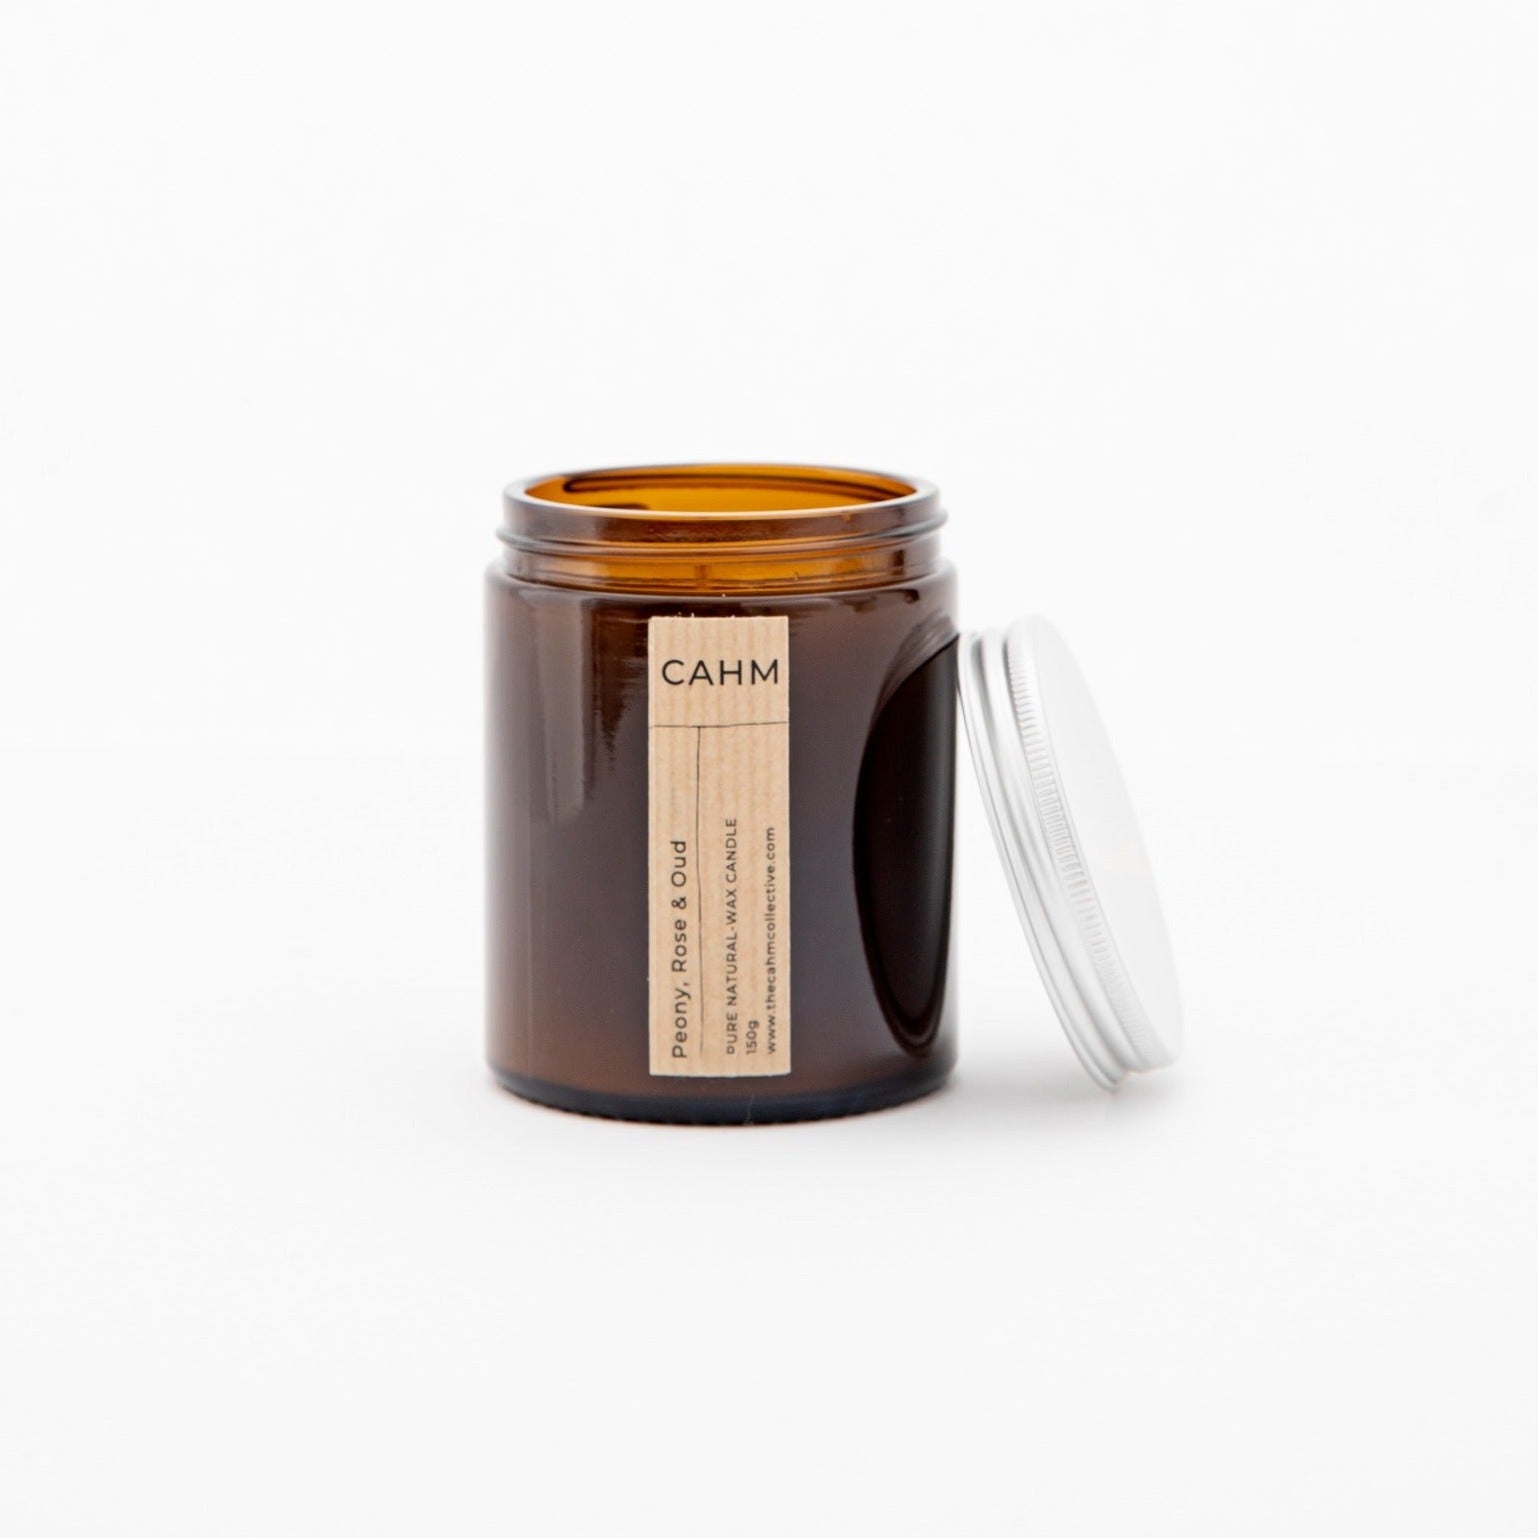 A Peony, Rose and Oud Candle from the Amber Jar Candle collection by The CAHM Collective.